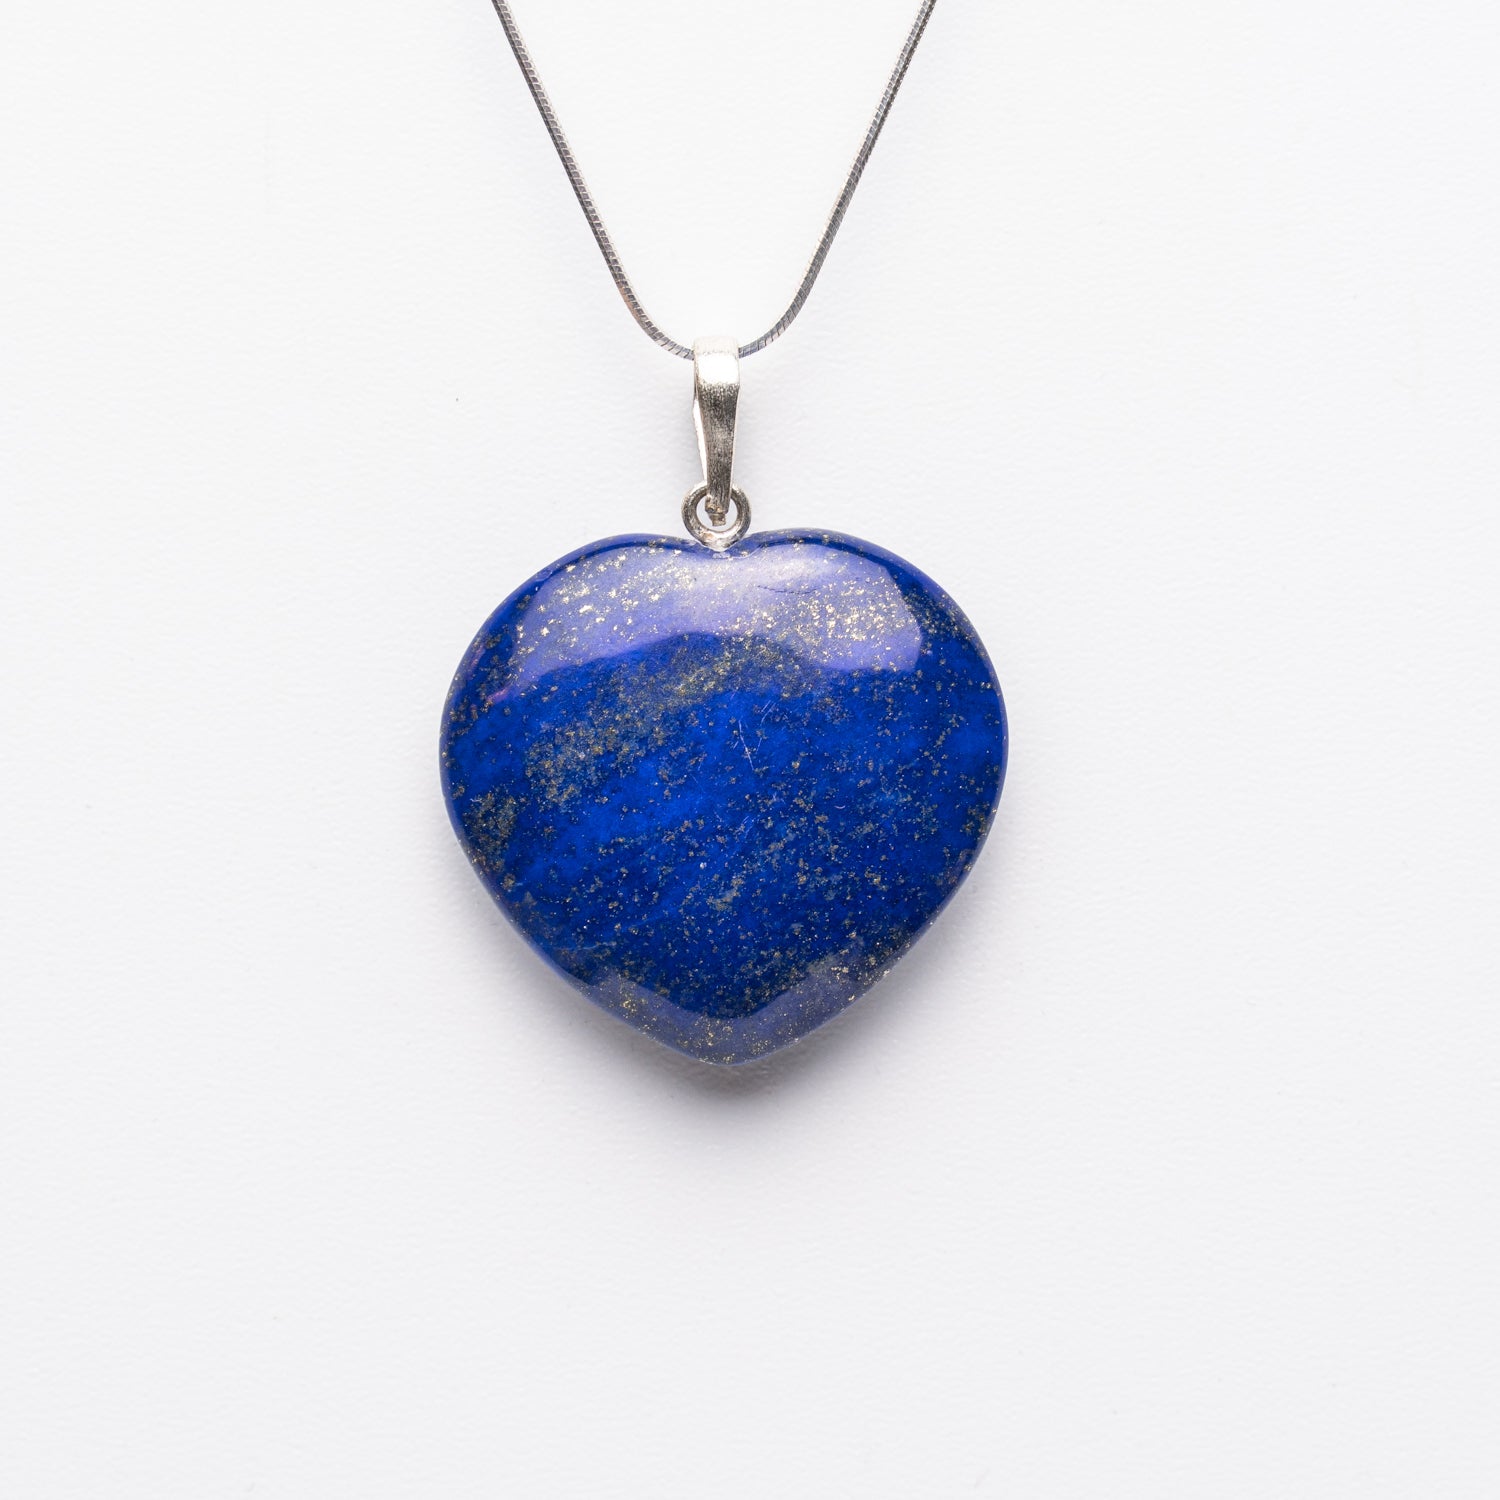 Genuine Lapis Lazuli Heart Pendant (11 grams) with Sterling Silver Chain